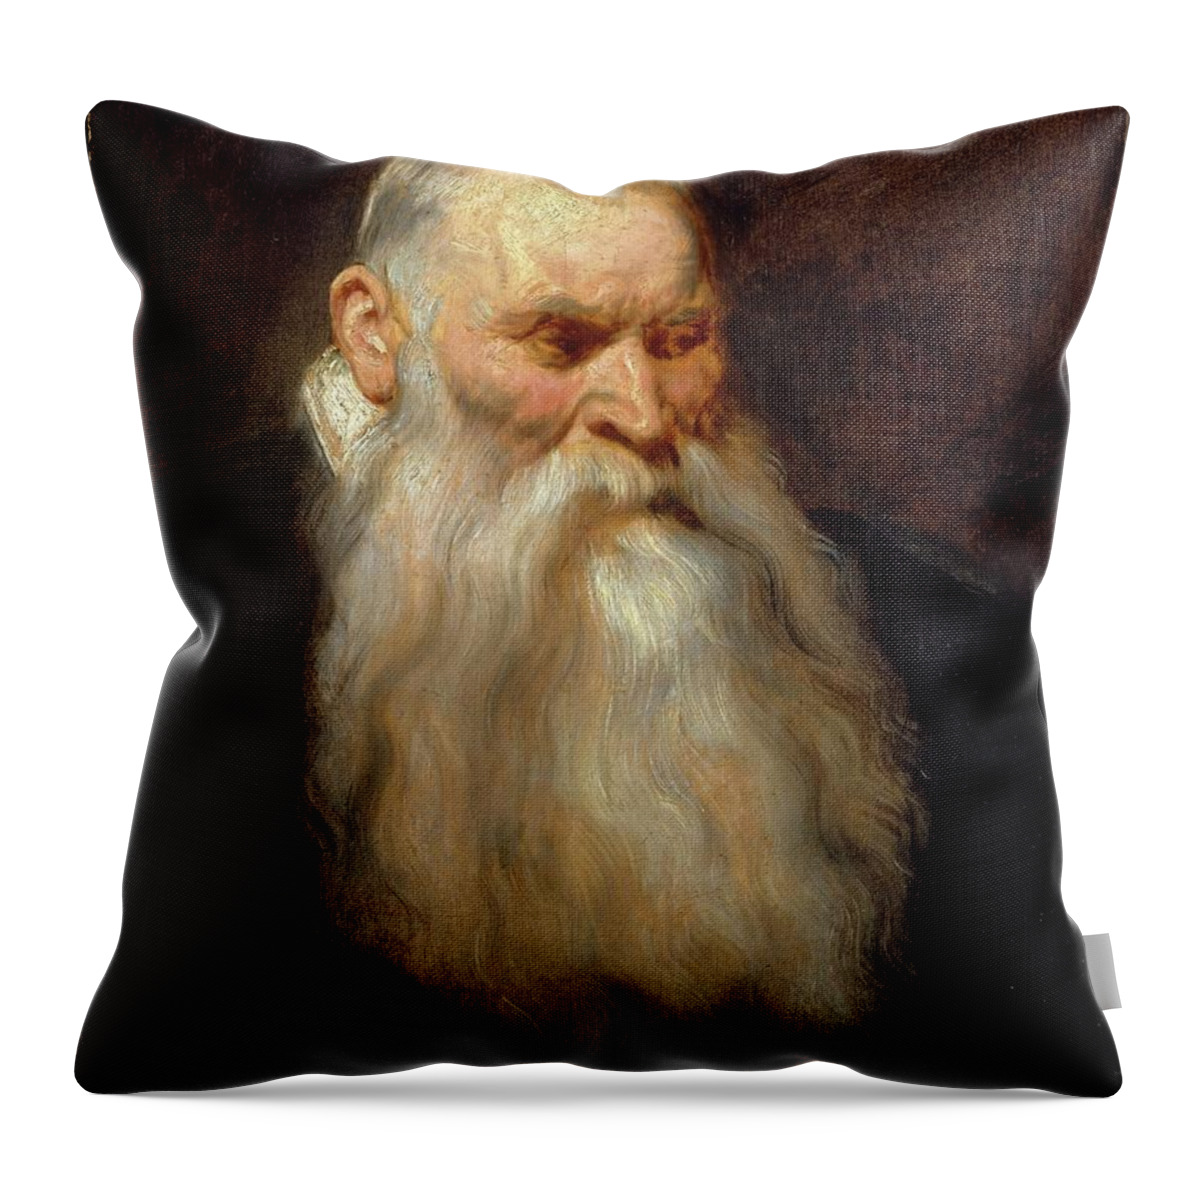 Portrait Throw Pillow featuring the painting Study Head Of An Old Man With A White Beard by Anthony Van Dyck